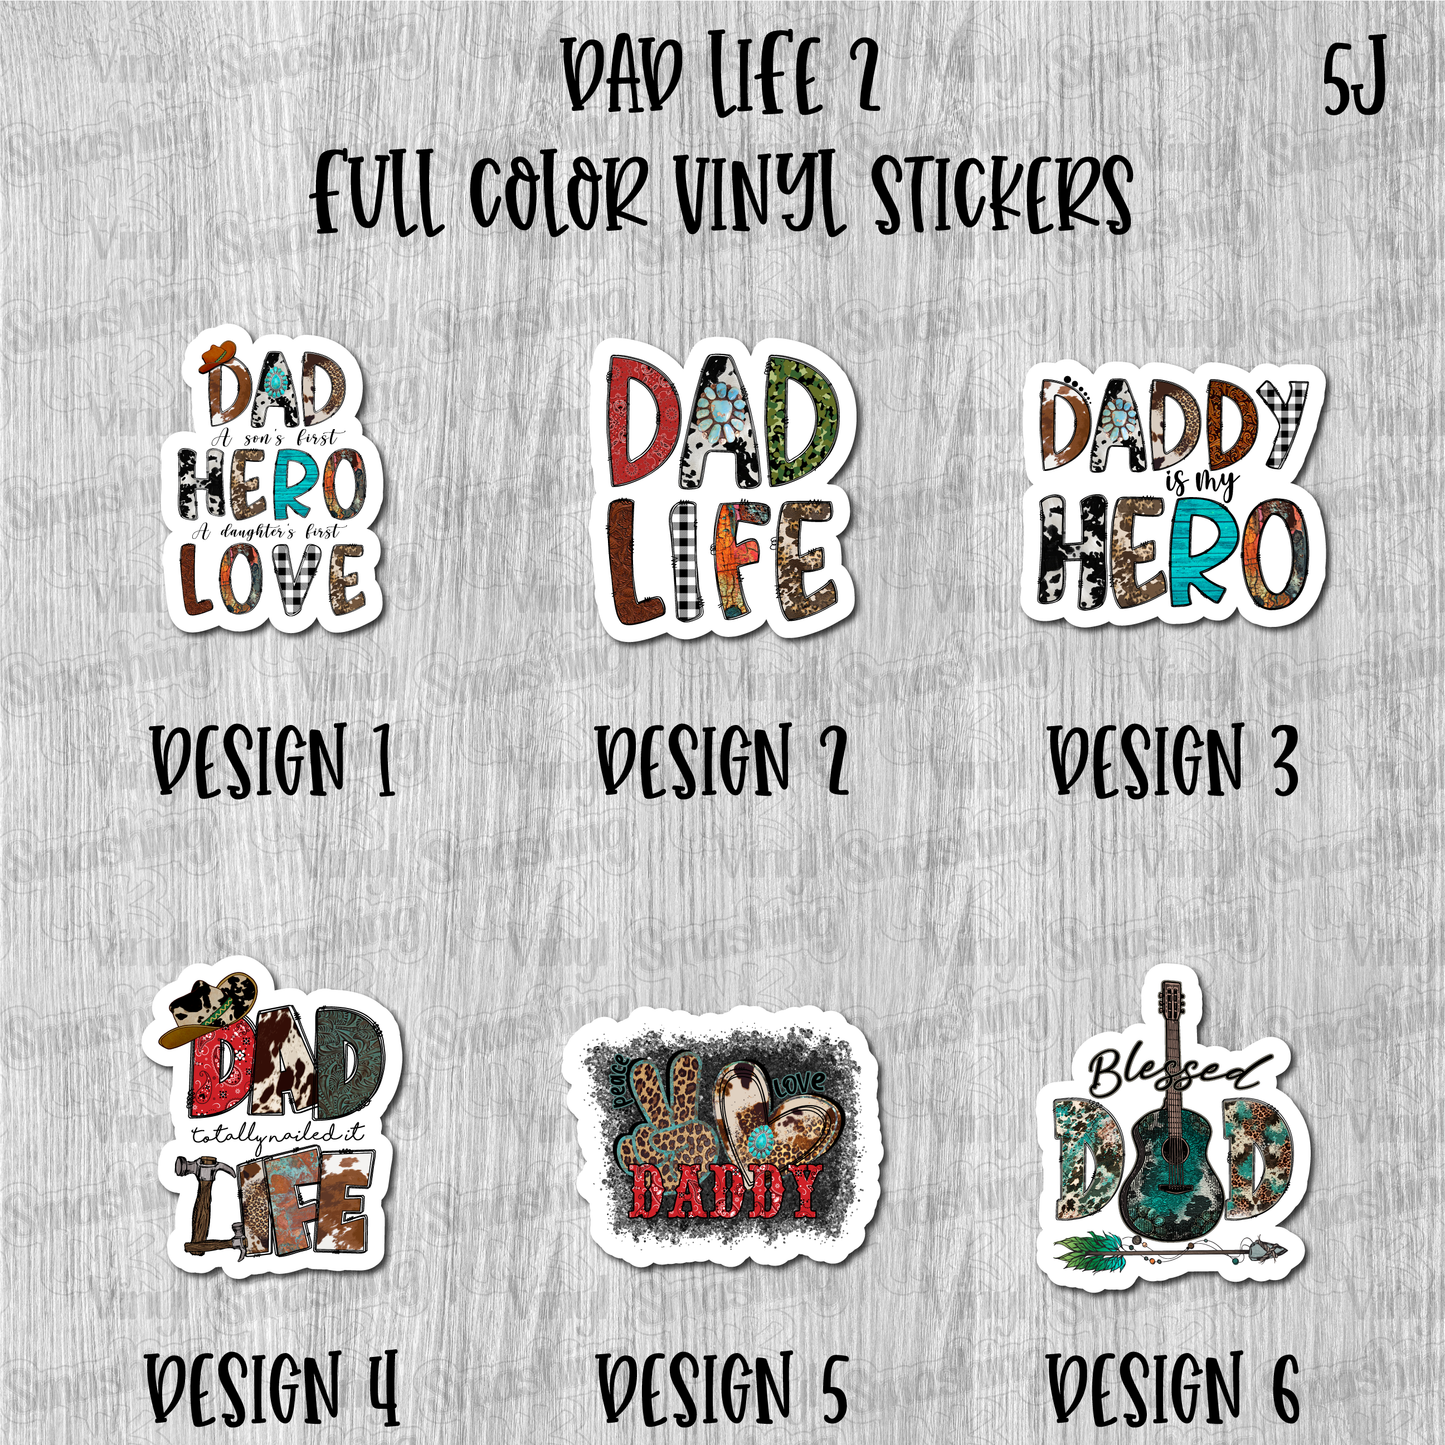 Dad Life 2 - Full Color Vinyl Stickers (SHIPS IN 3-7 BUS DAYS)